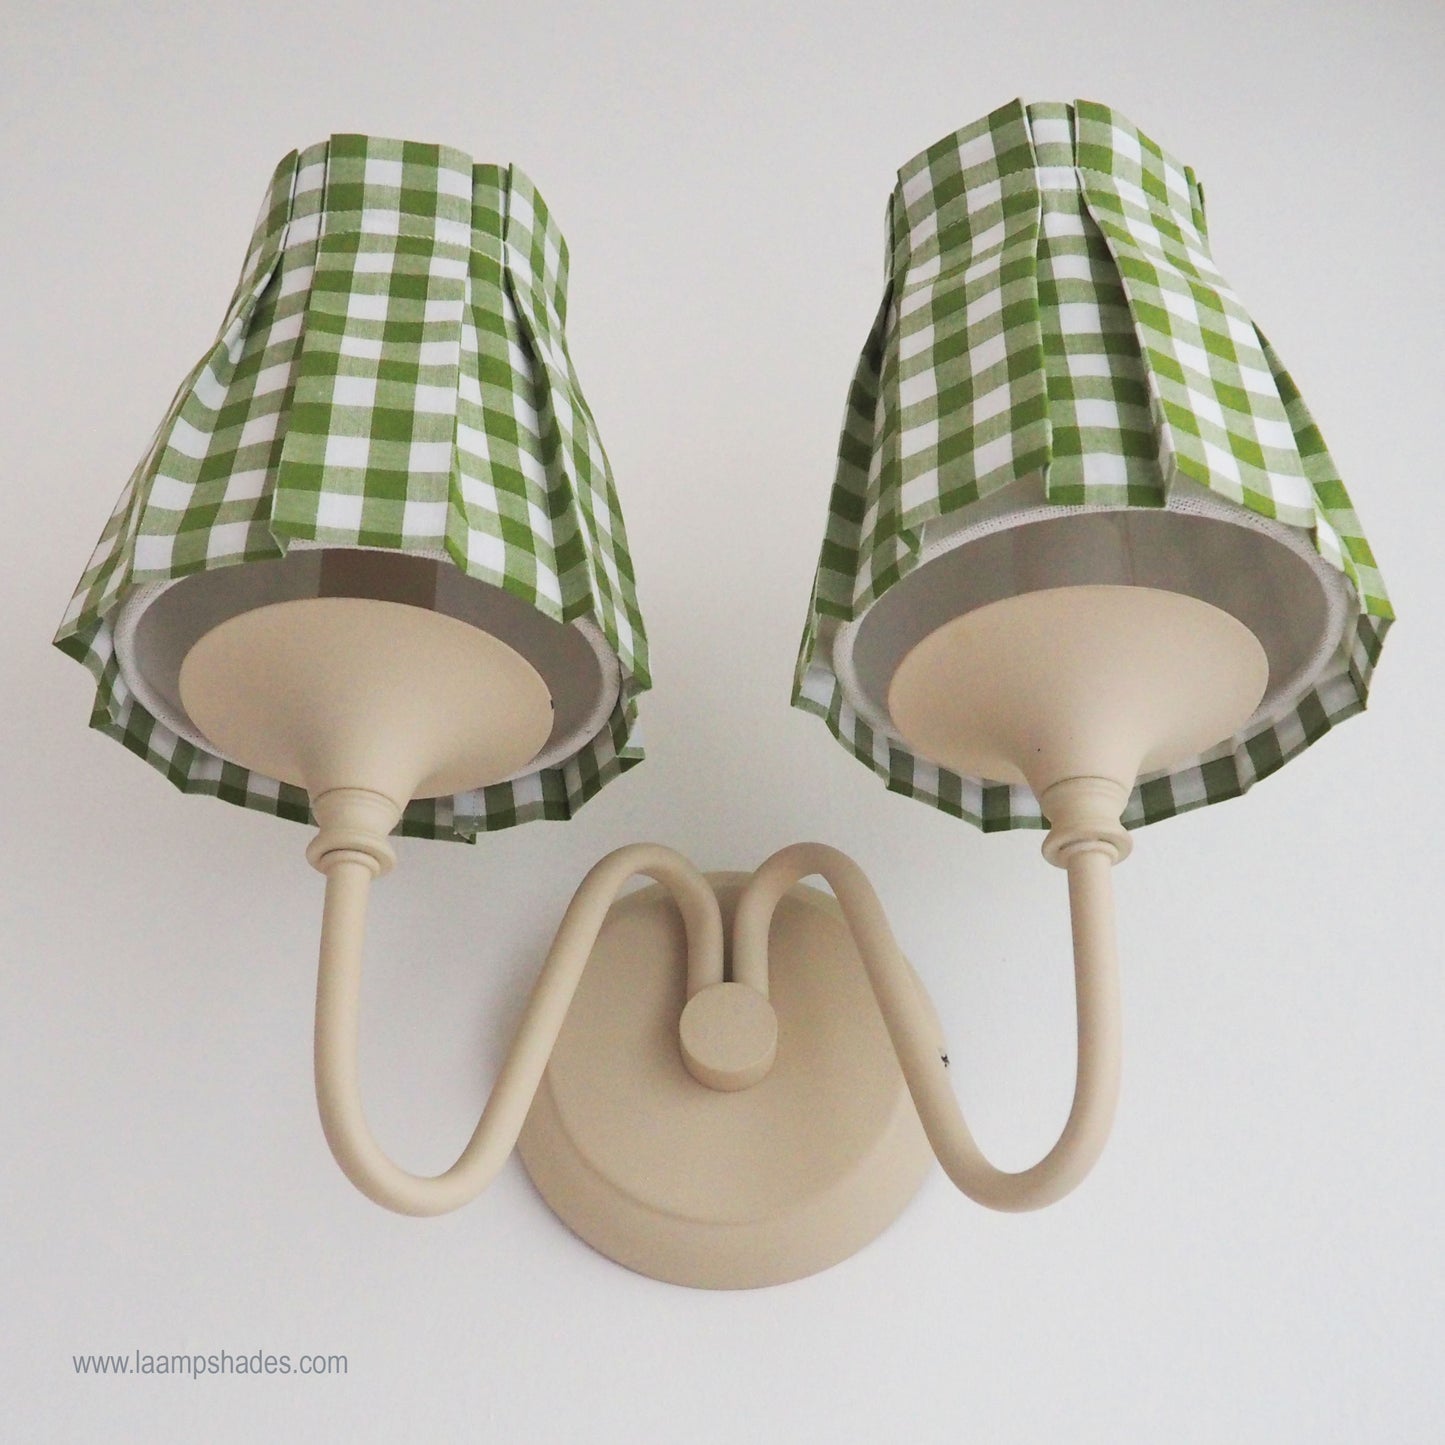 Candle clip box pleat green gingham fabric loose lampshade